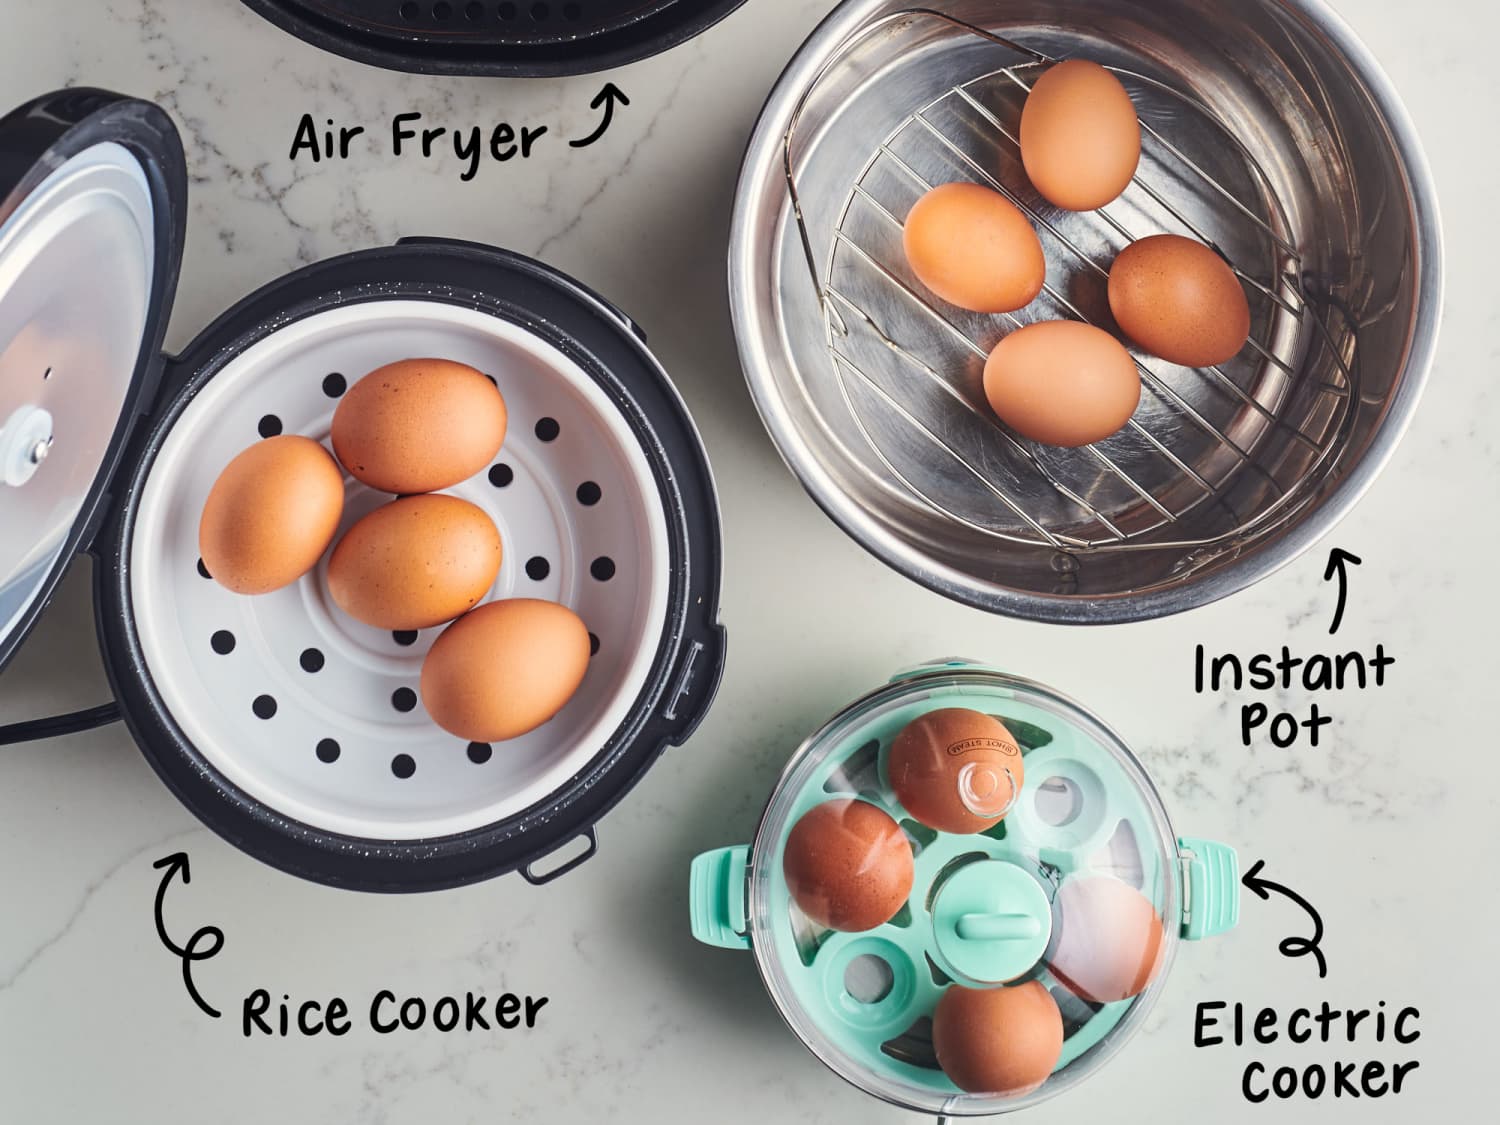 https://cdn.apartmenttherapy.info/image/upload/f_jpg,q_auto:eco,c_fill,g_auto,w_1500,ar_4:3/k%2FPhoto%2FSeries%2F2021-03-tools-showdown-egg-cookers%2Ftools-hardboiled-eggs-inpost